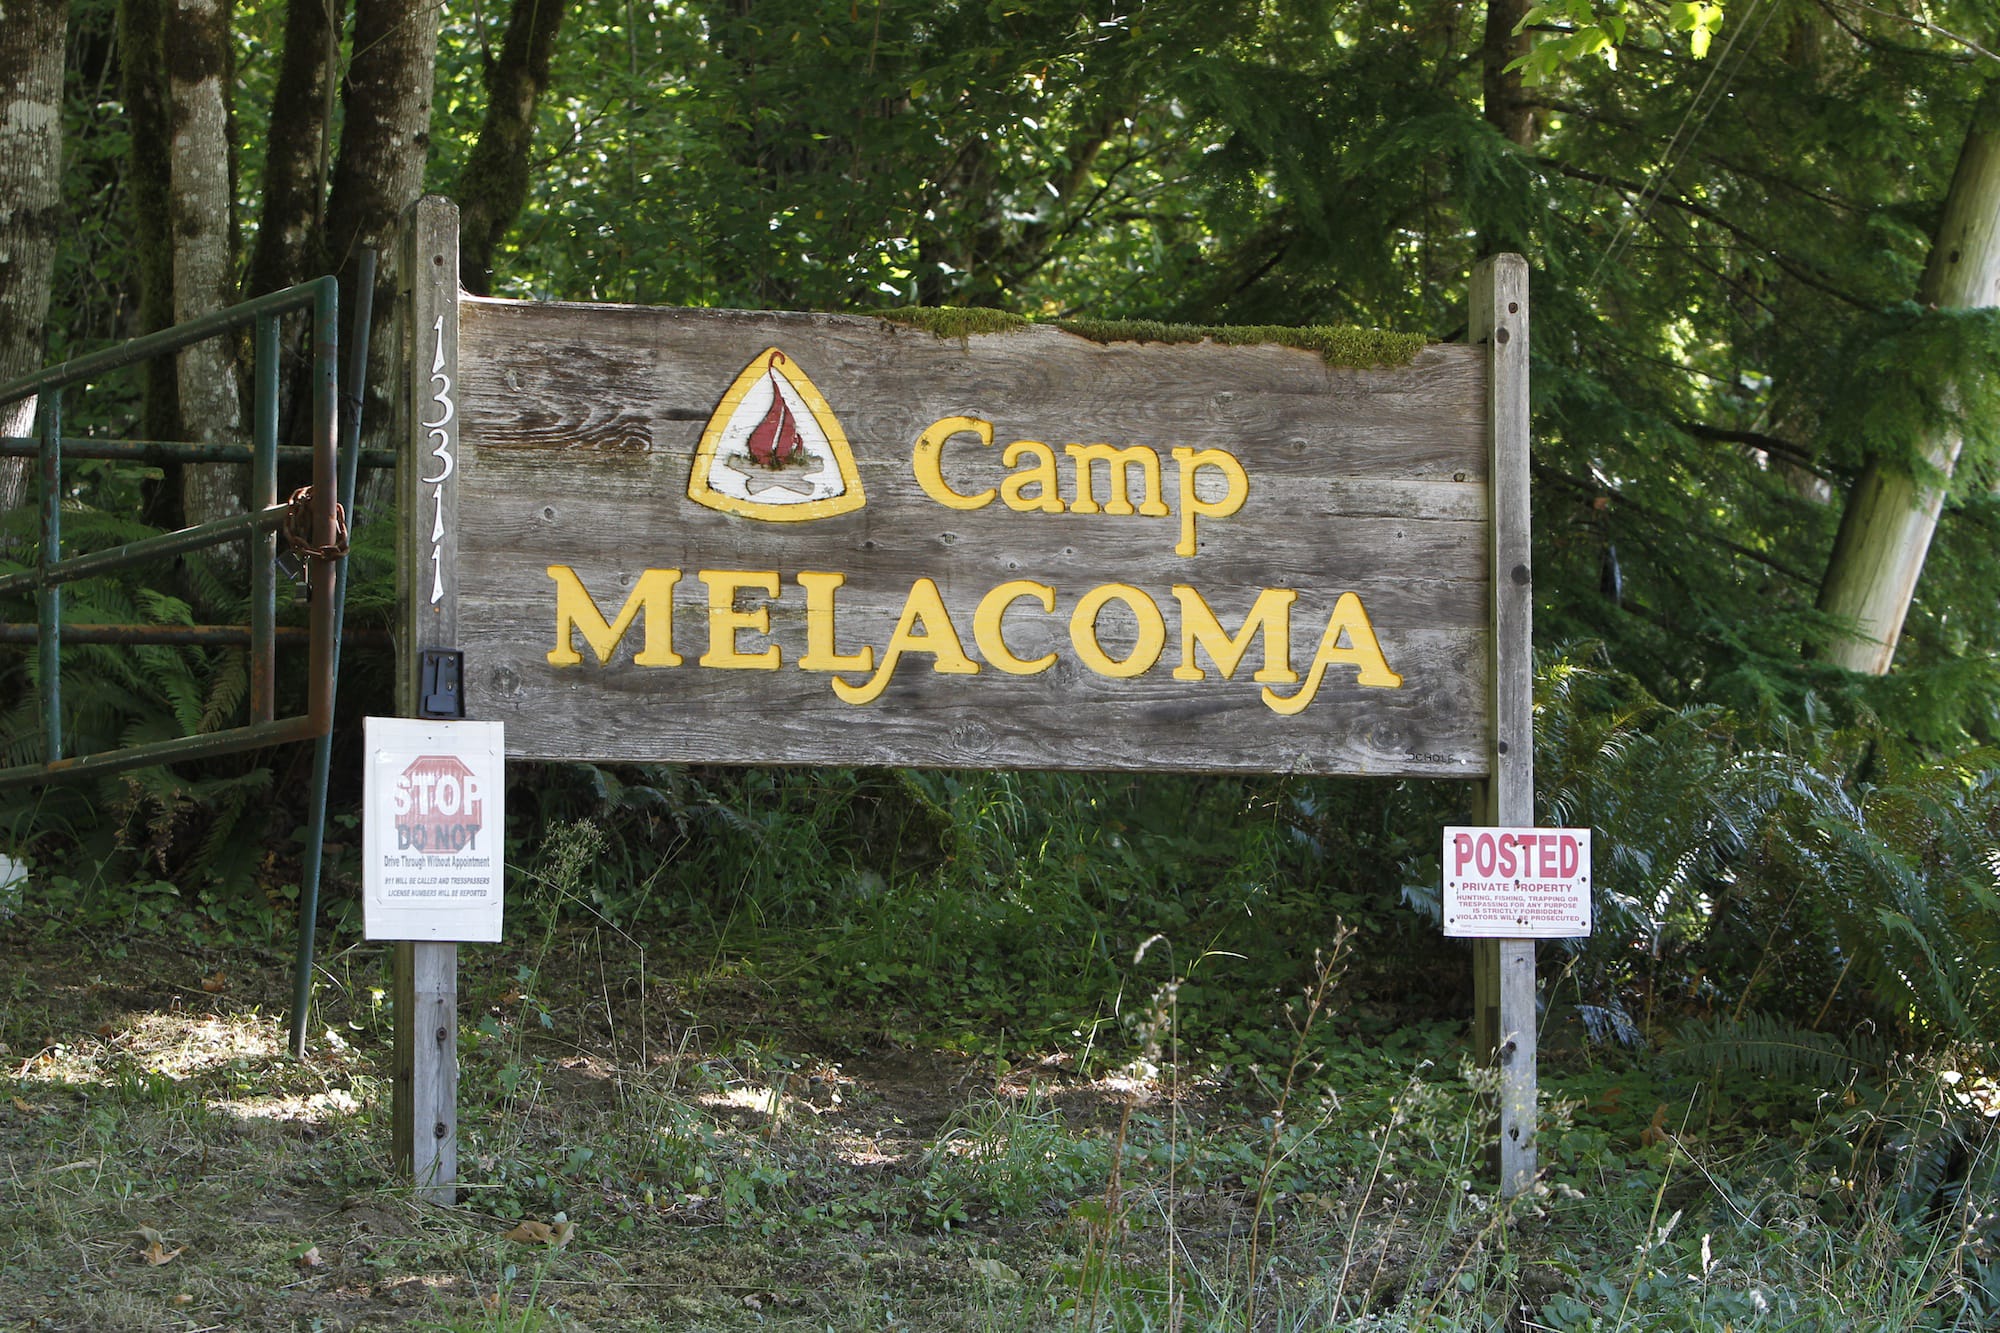 The entry to Camp Melacoma is located up Washougal River Road at milepost 13 in Skamania County.